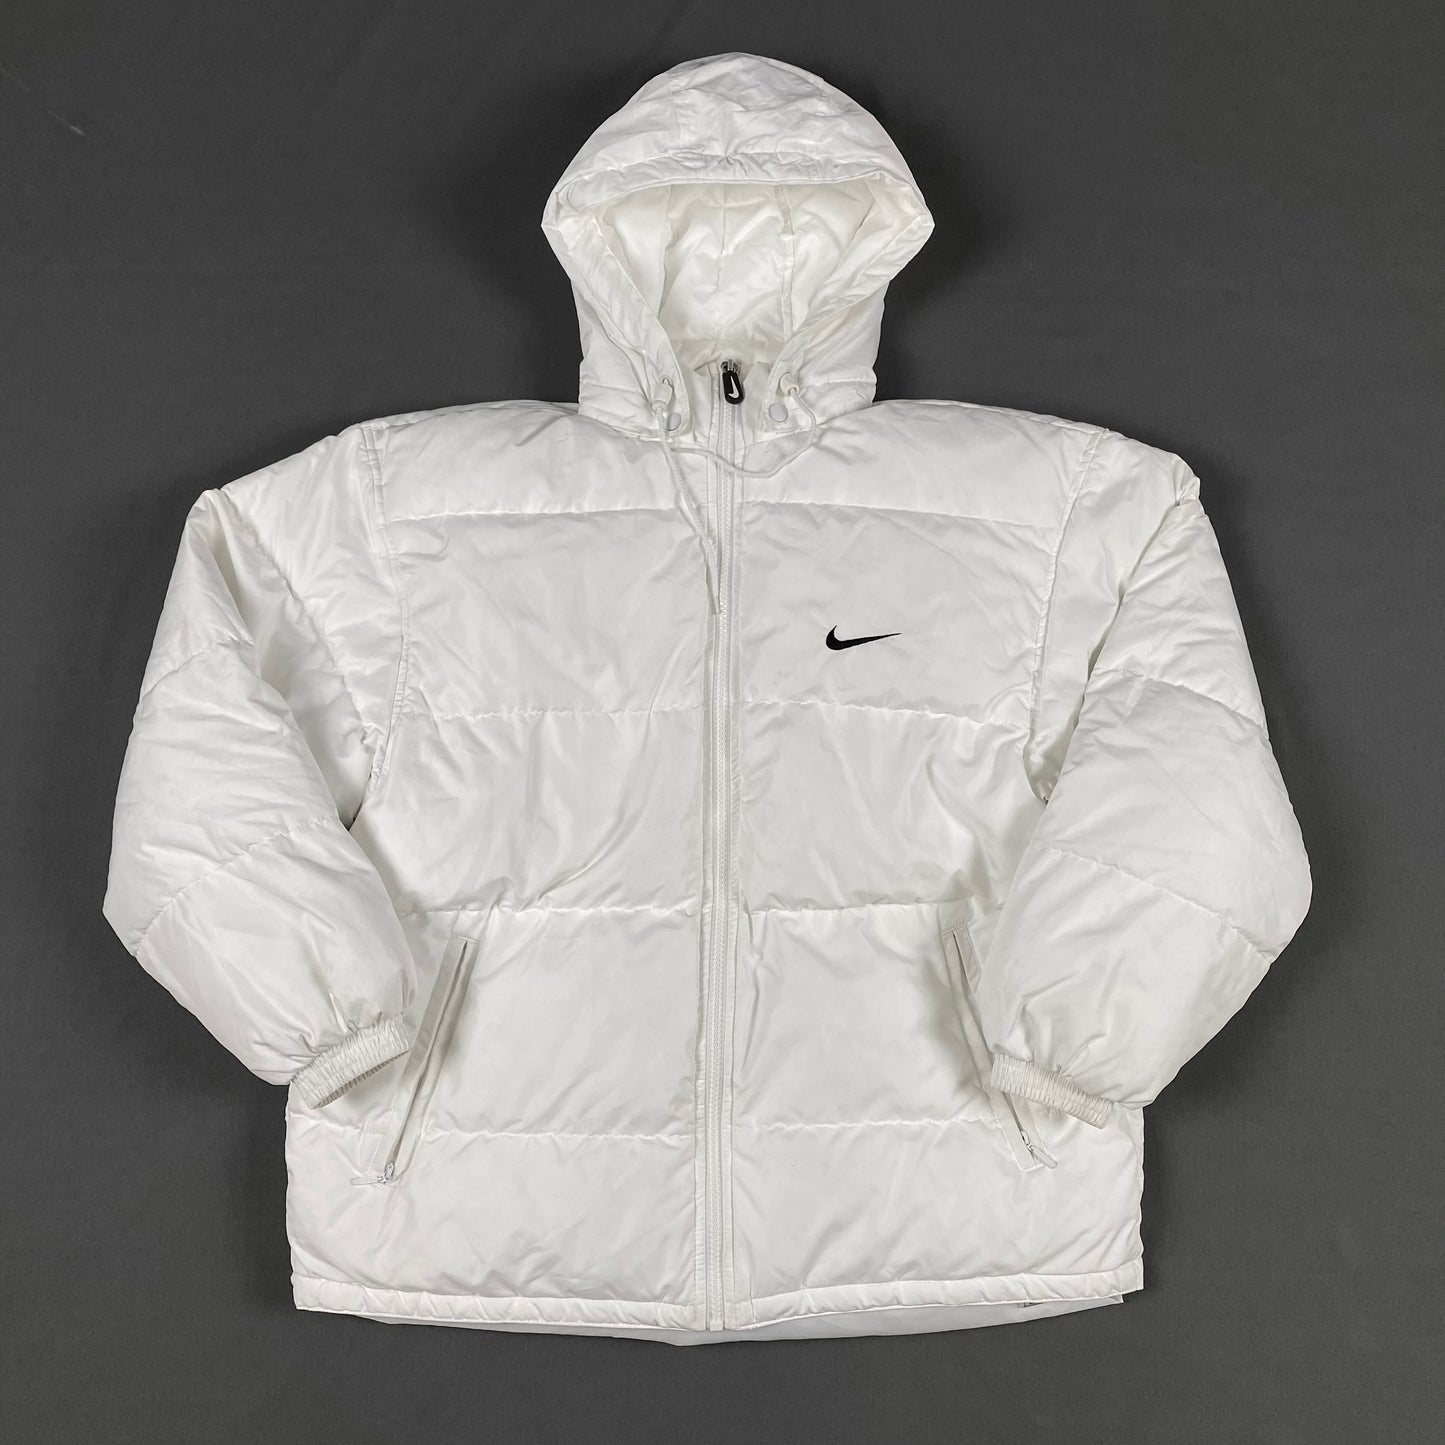 Vintage NIKE Spell Out Puffer Jacket